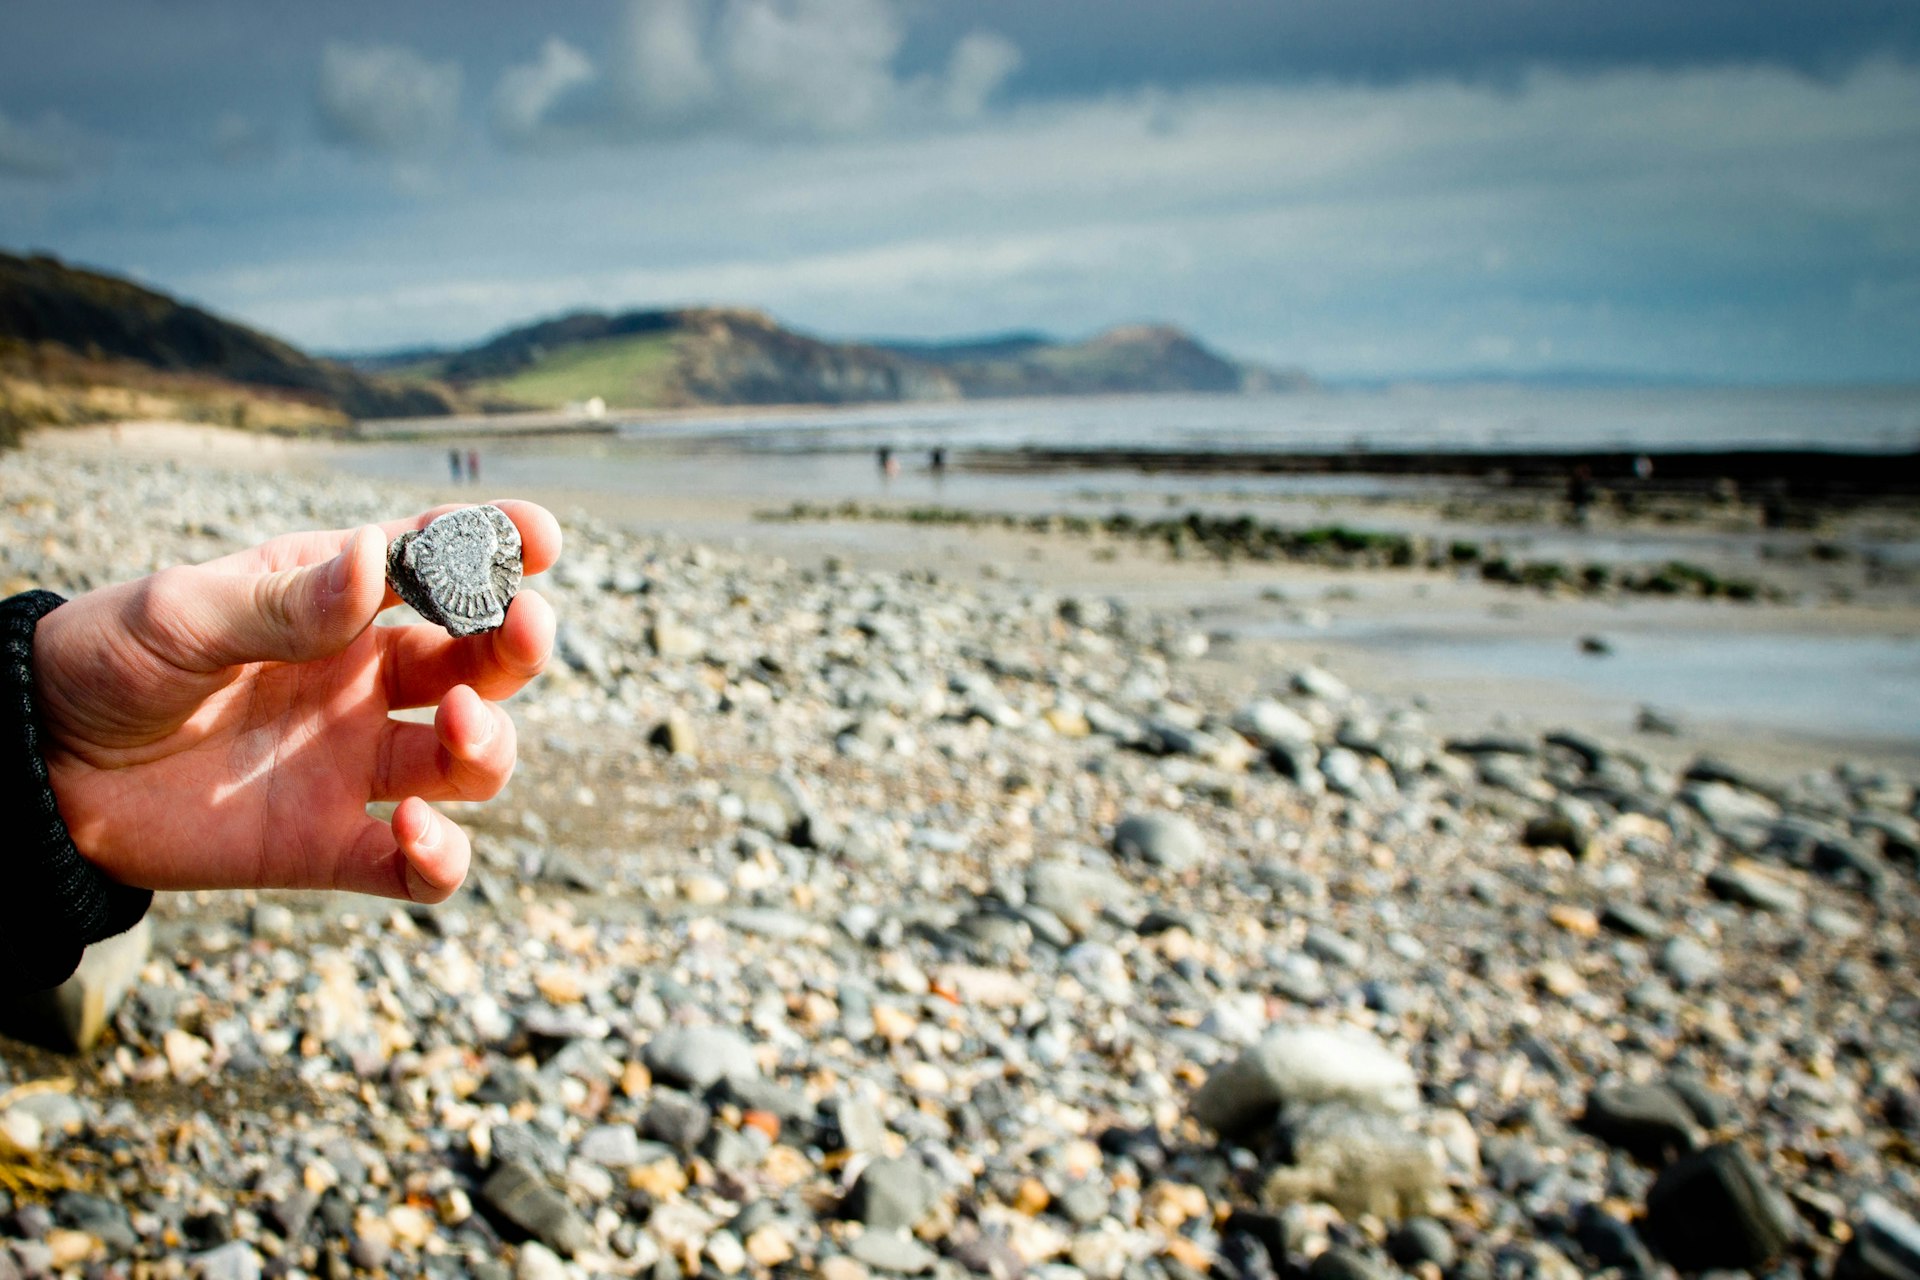 Hand holding an ammonite fossil found in the rocks on the beach between Lyme Regis and Charmouth.